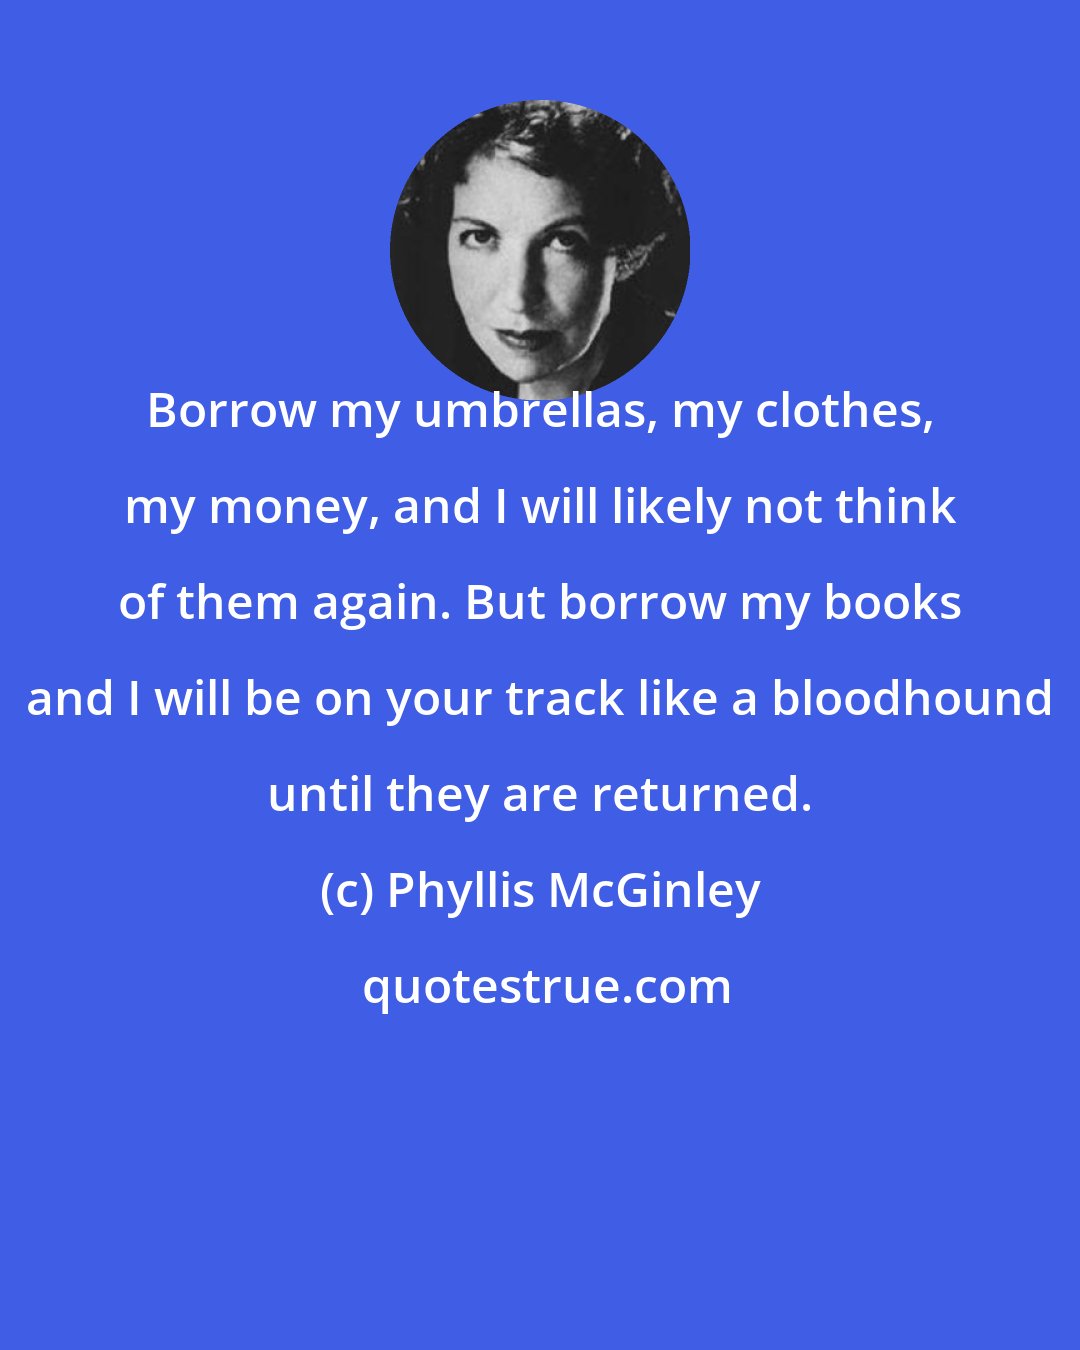 Phyllis McGinley: Borrow my umbrellas, my clothes, my money, and I will likely not think of them again. But borrow my books and I will be on your track like a bloodhound until they are returned.